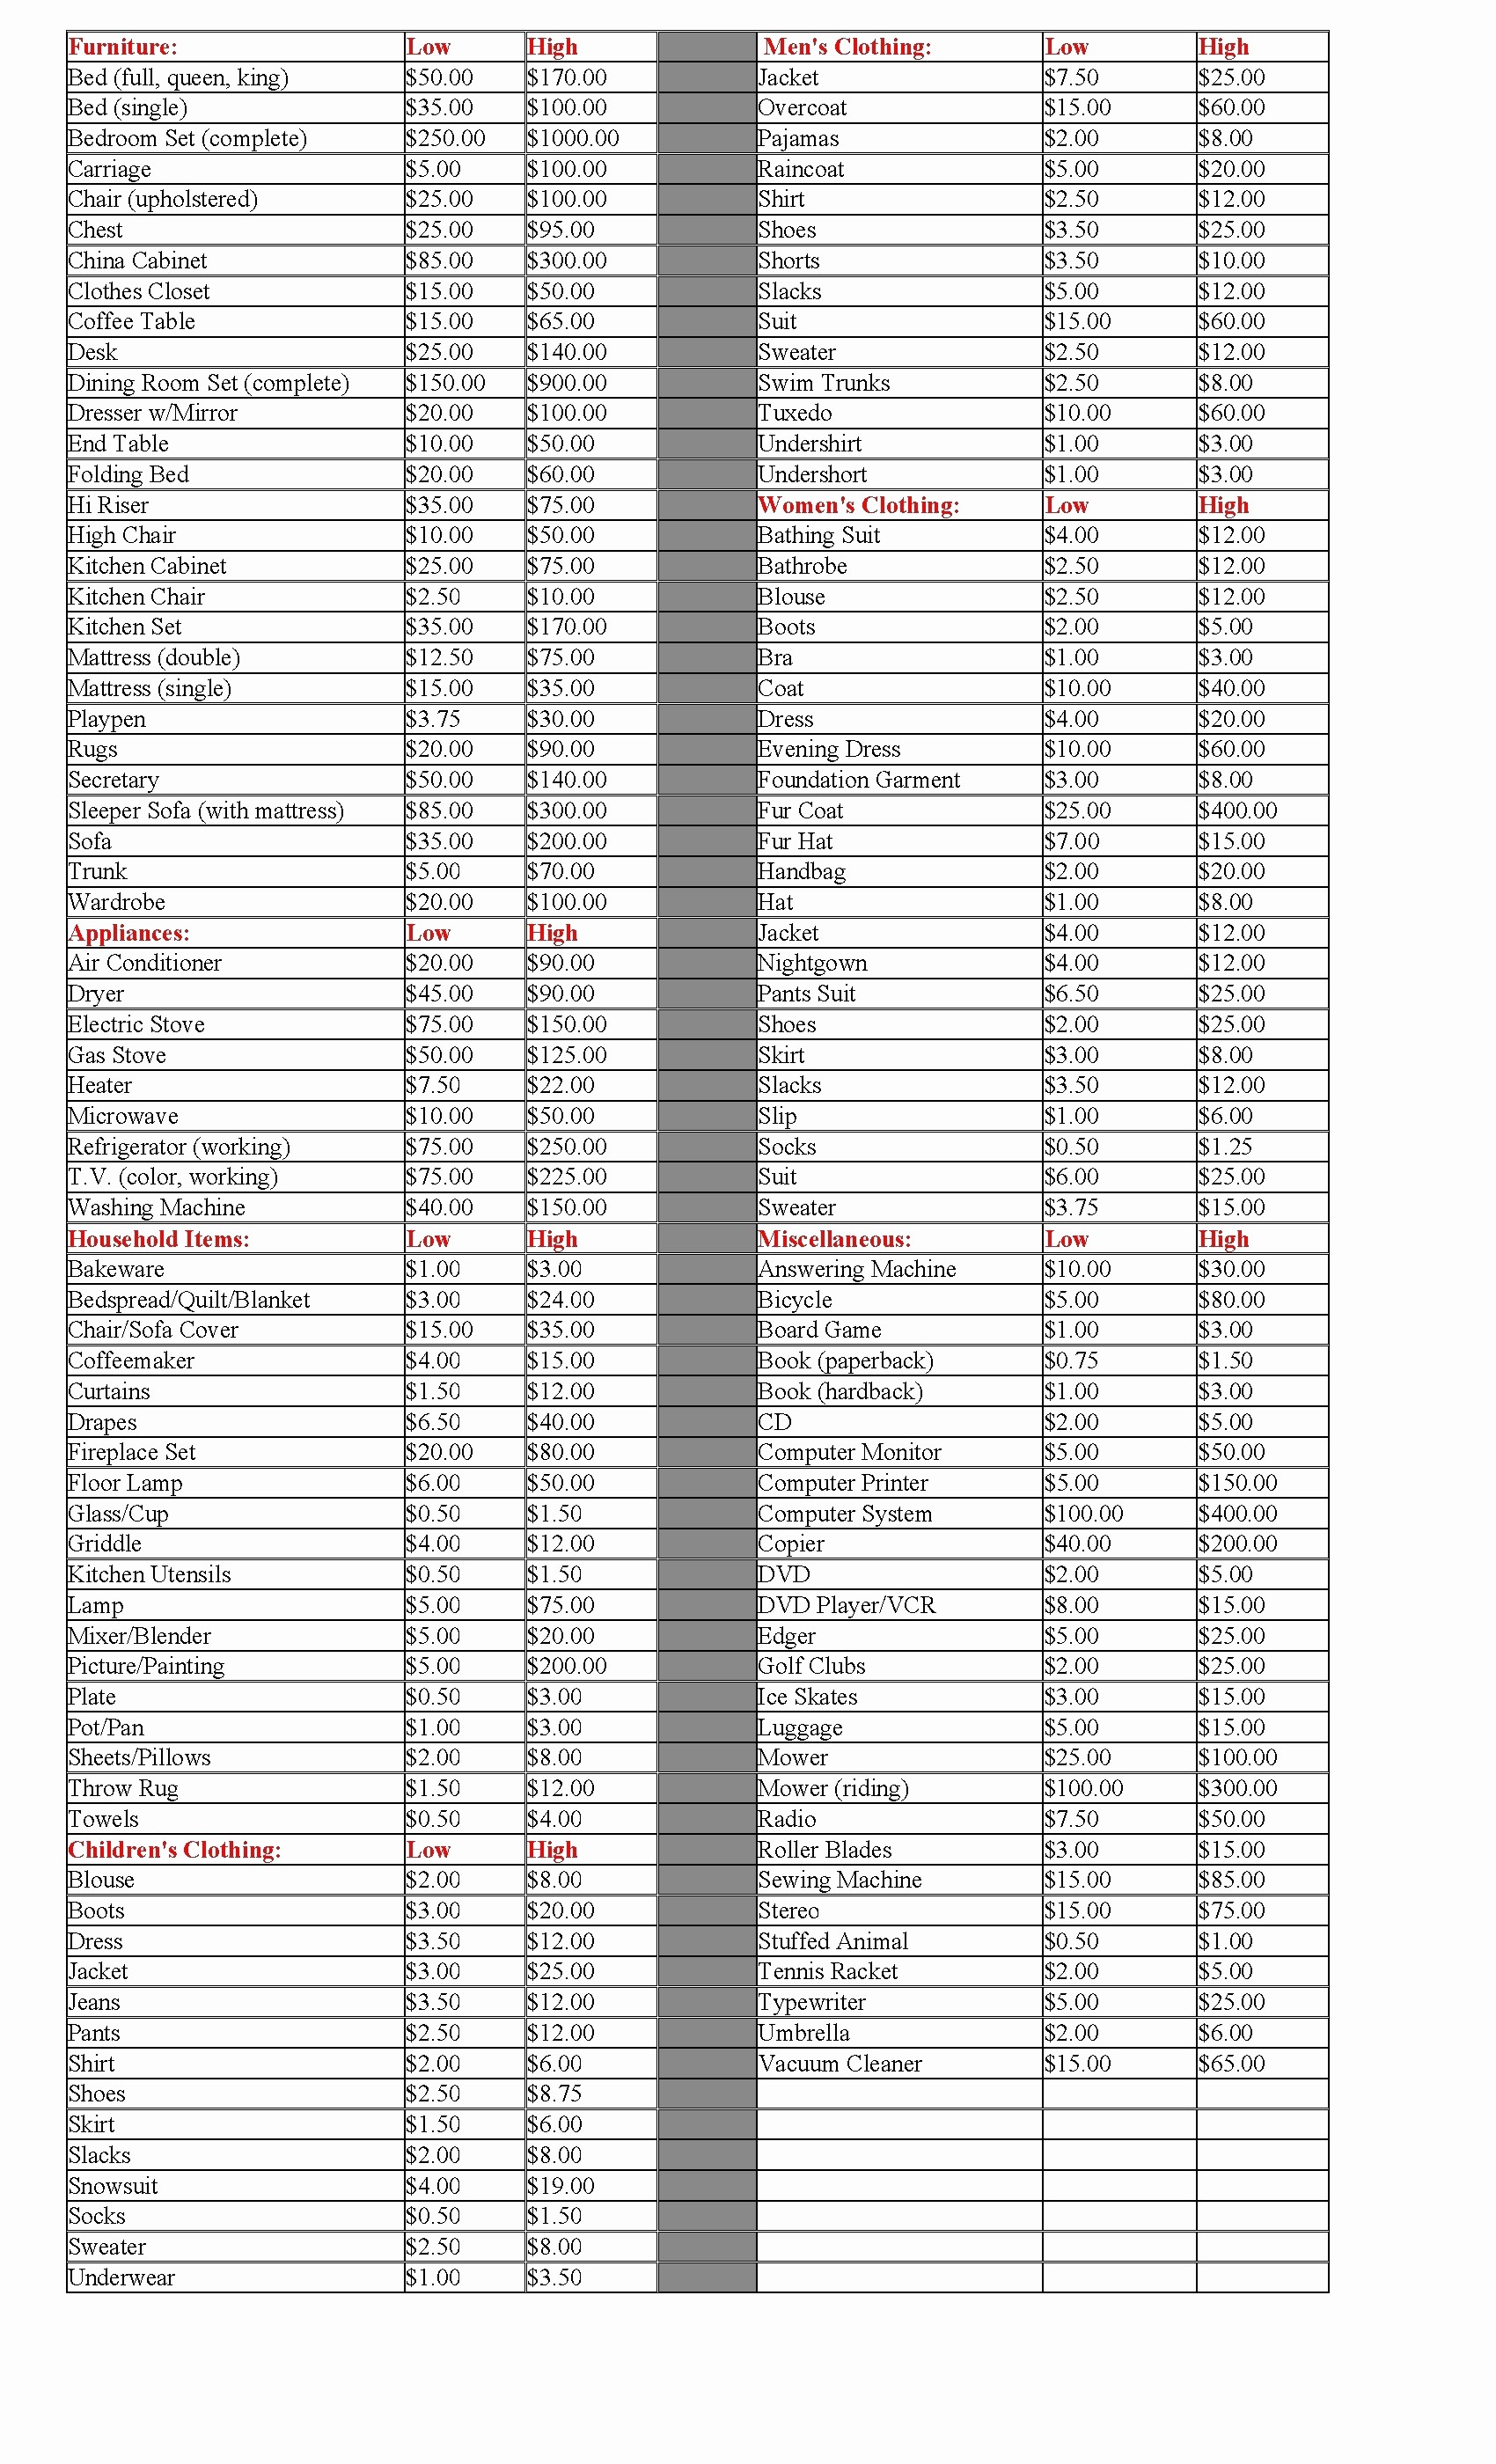 Salvation Army Donation Guide Spreadsheet Elegant Document